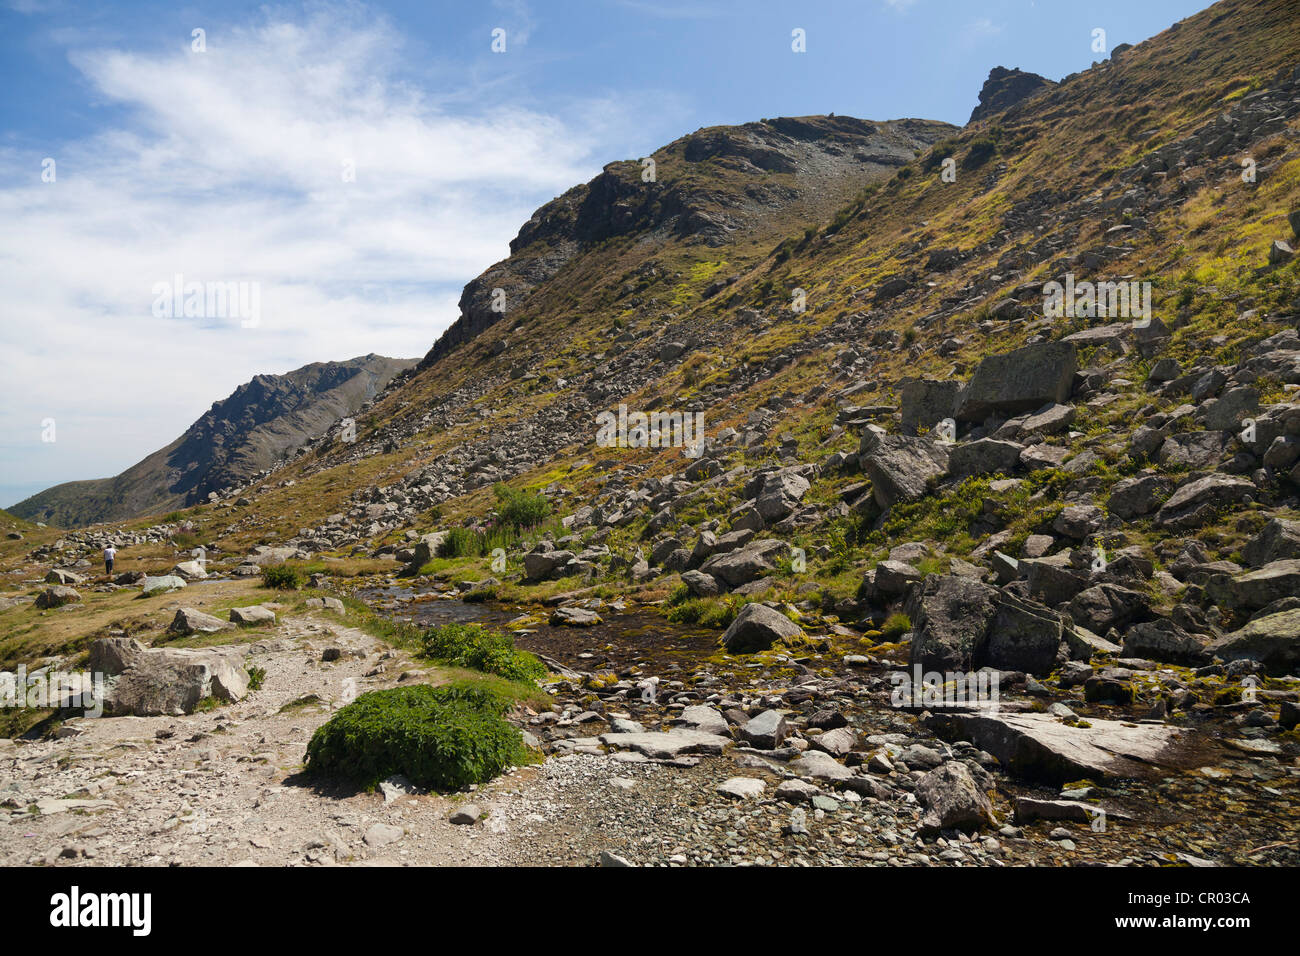 On the Pian del Re, high plateau, source of the Po River, Cottian Alps, Cuneo, Piedmont, Italy, Europe Stock Photo